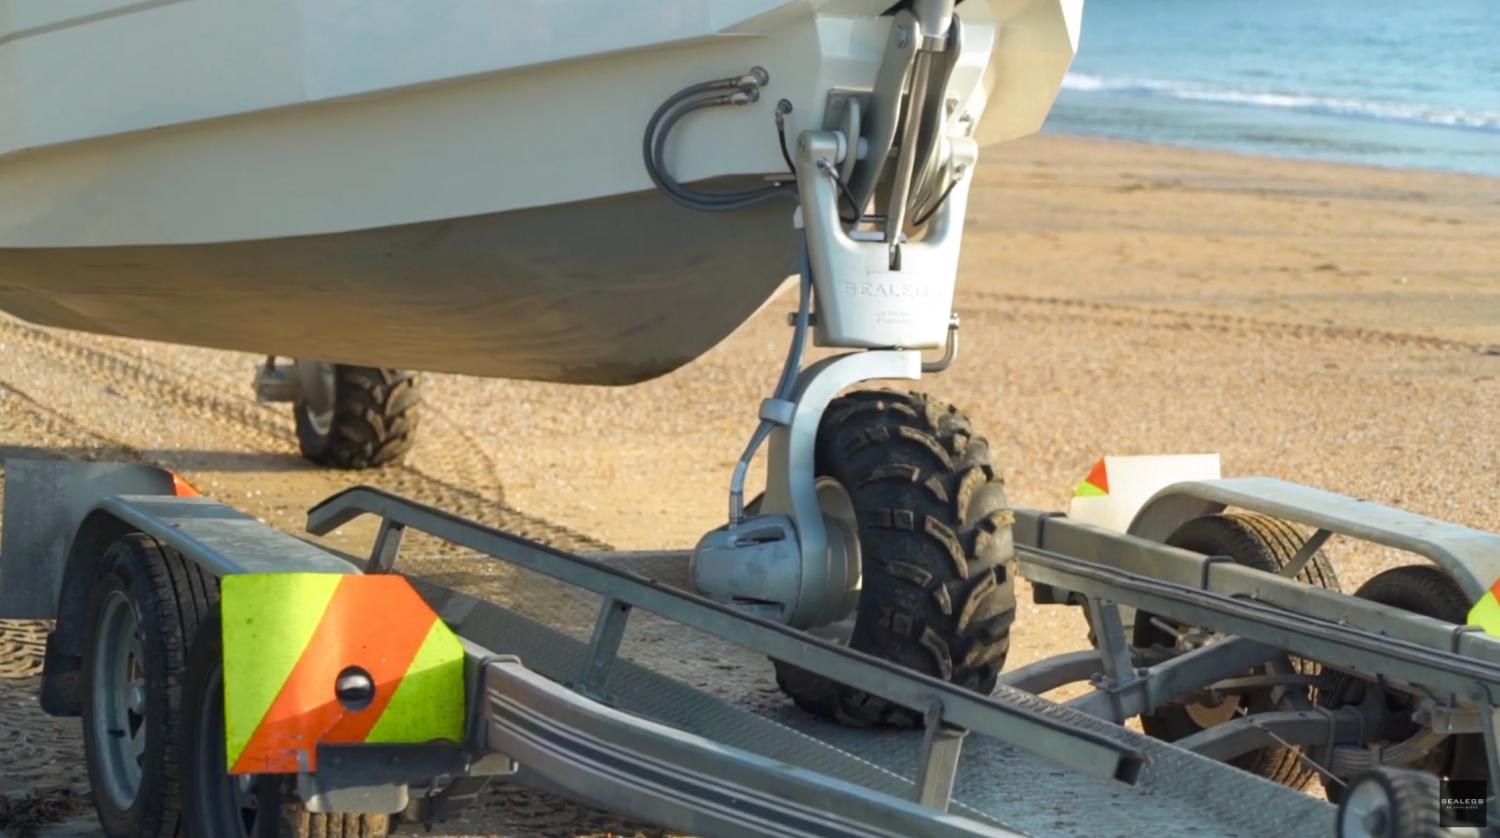 Sealegs Amphibious Boats Feature 3 Retractable Wheels To Get In and Out Of Water